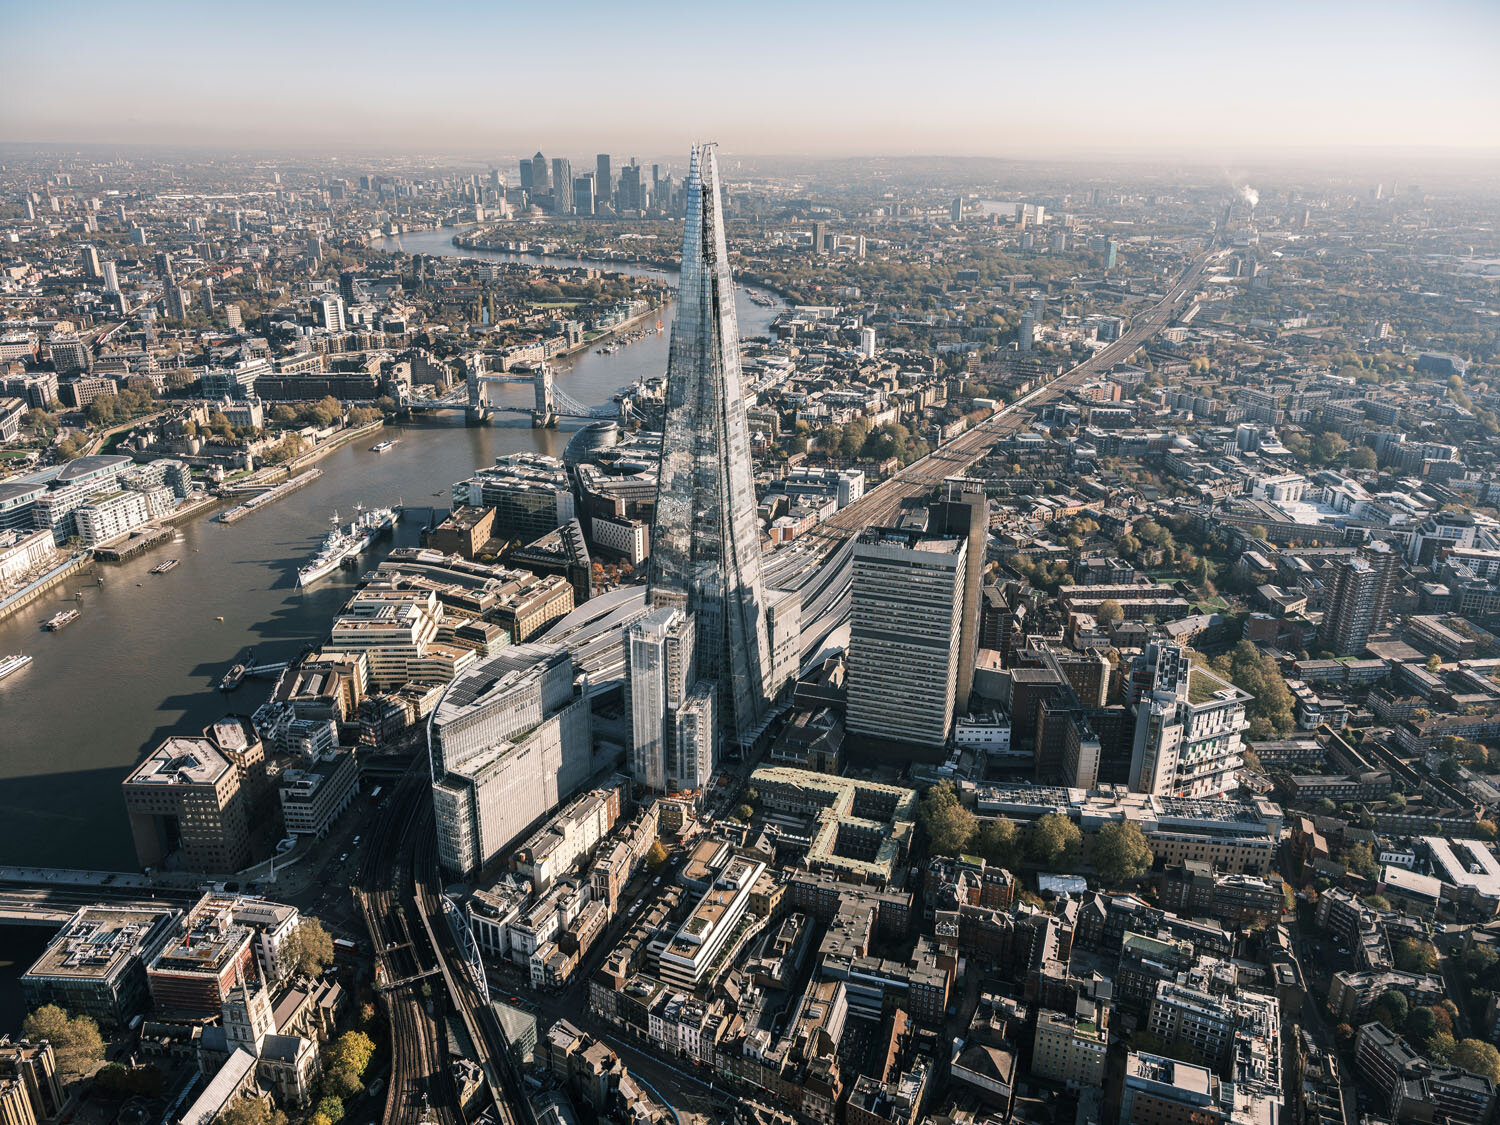  London Aerial View - The Shard and Surroundings 